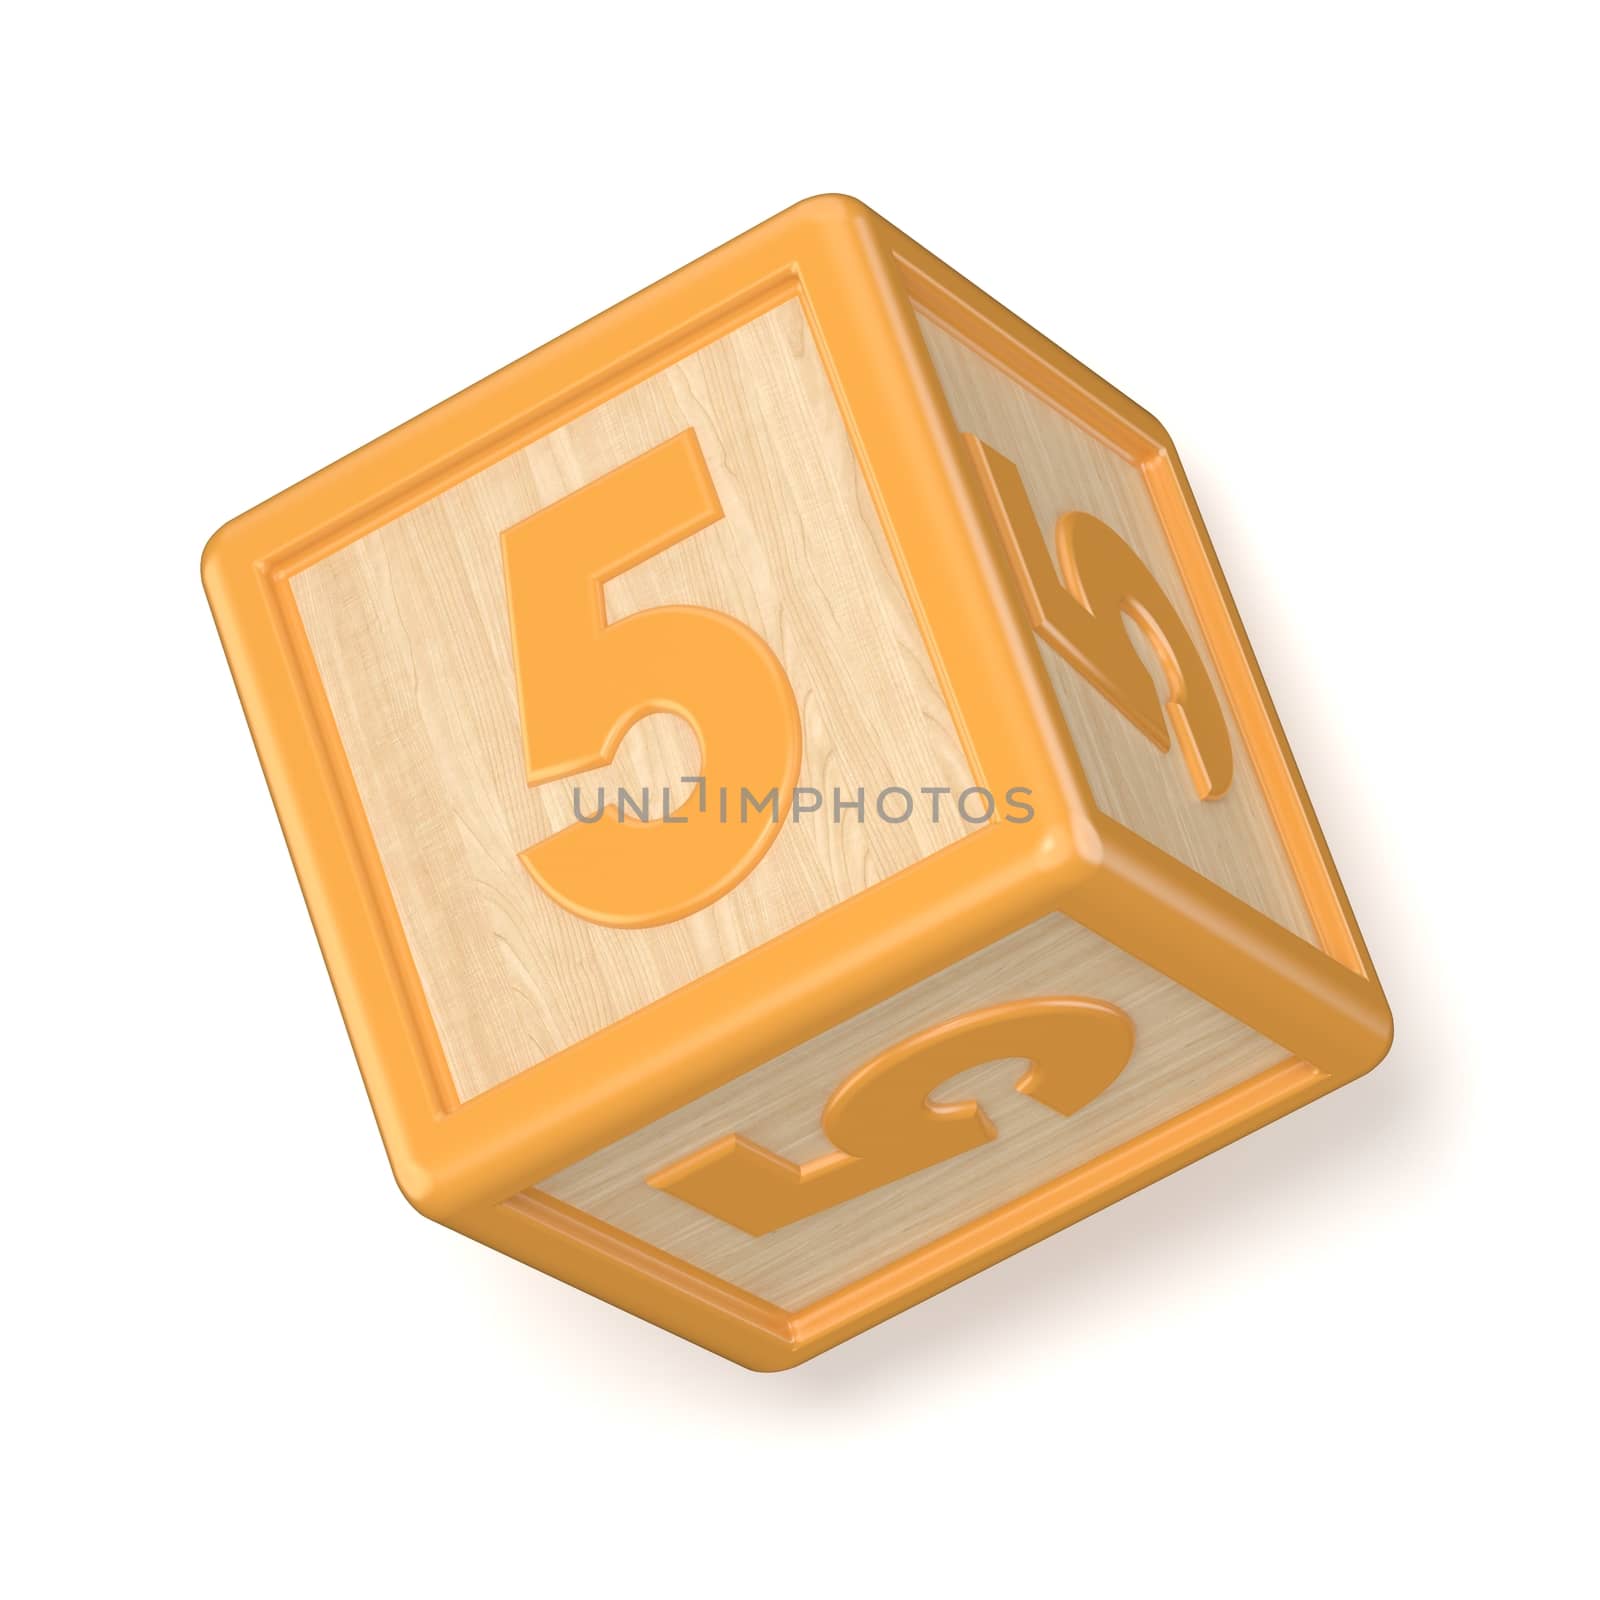 Number 5 FIVE wooden alphabet blocks font rotated. 3D render illustration isolated on white background